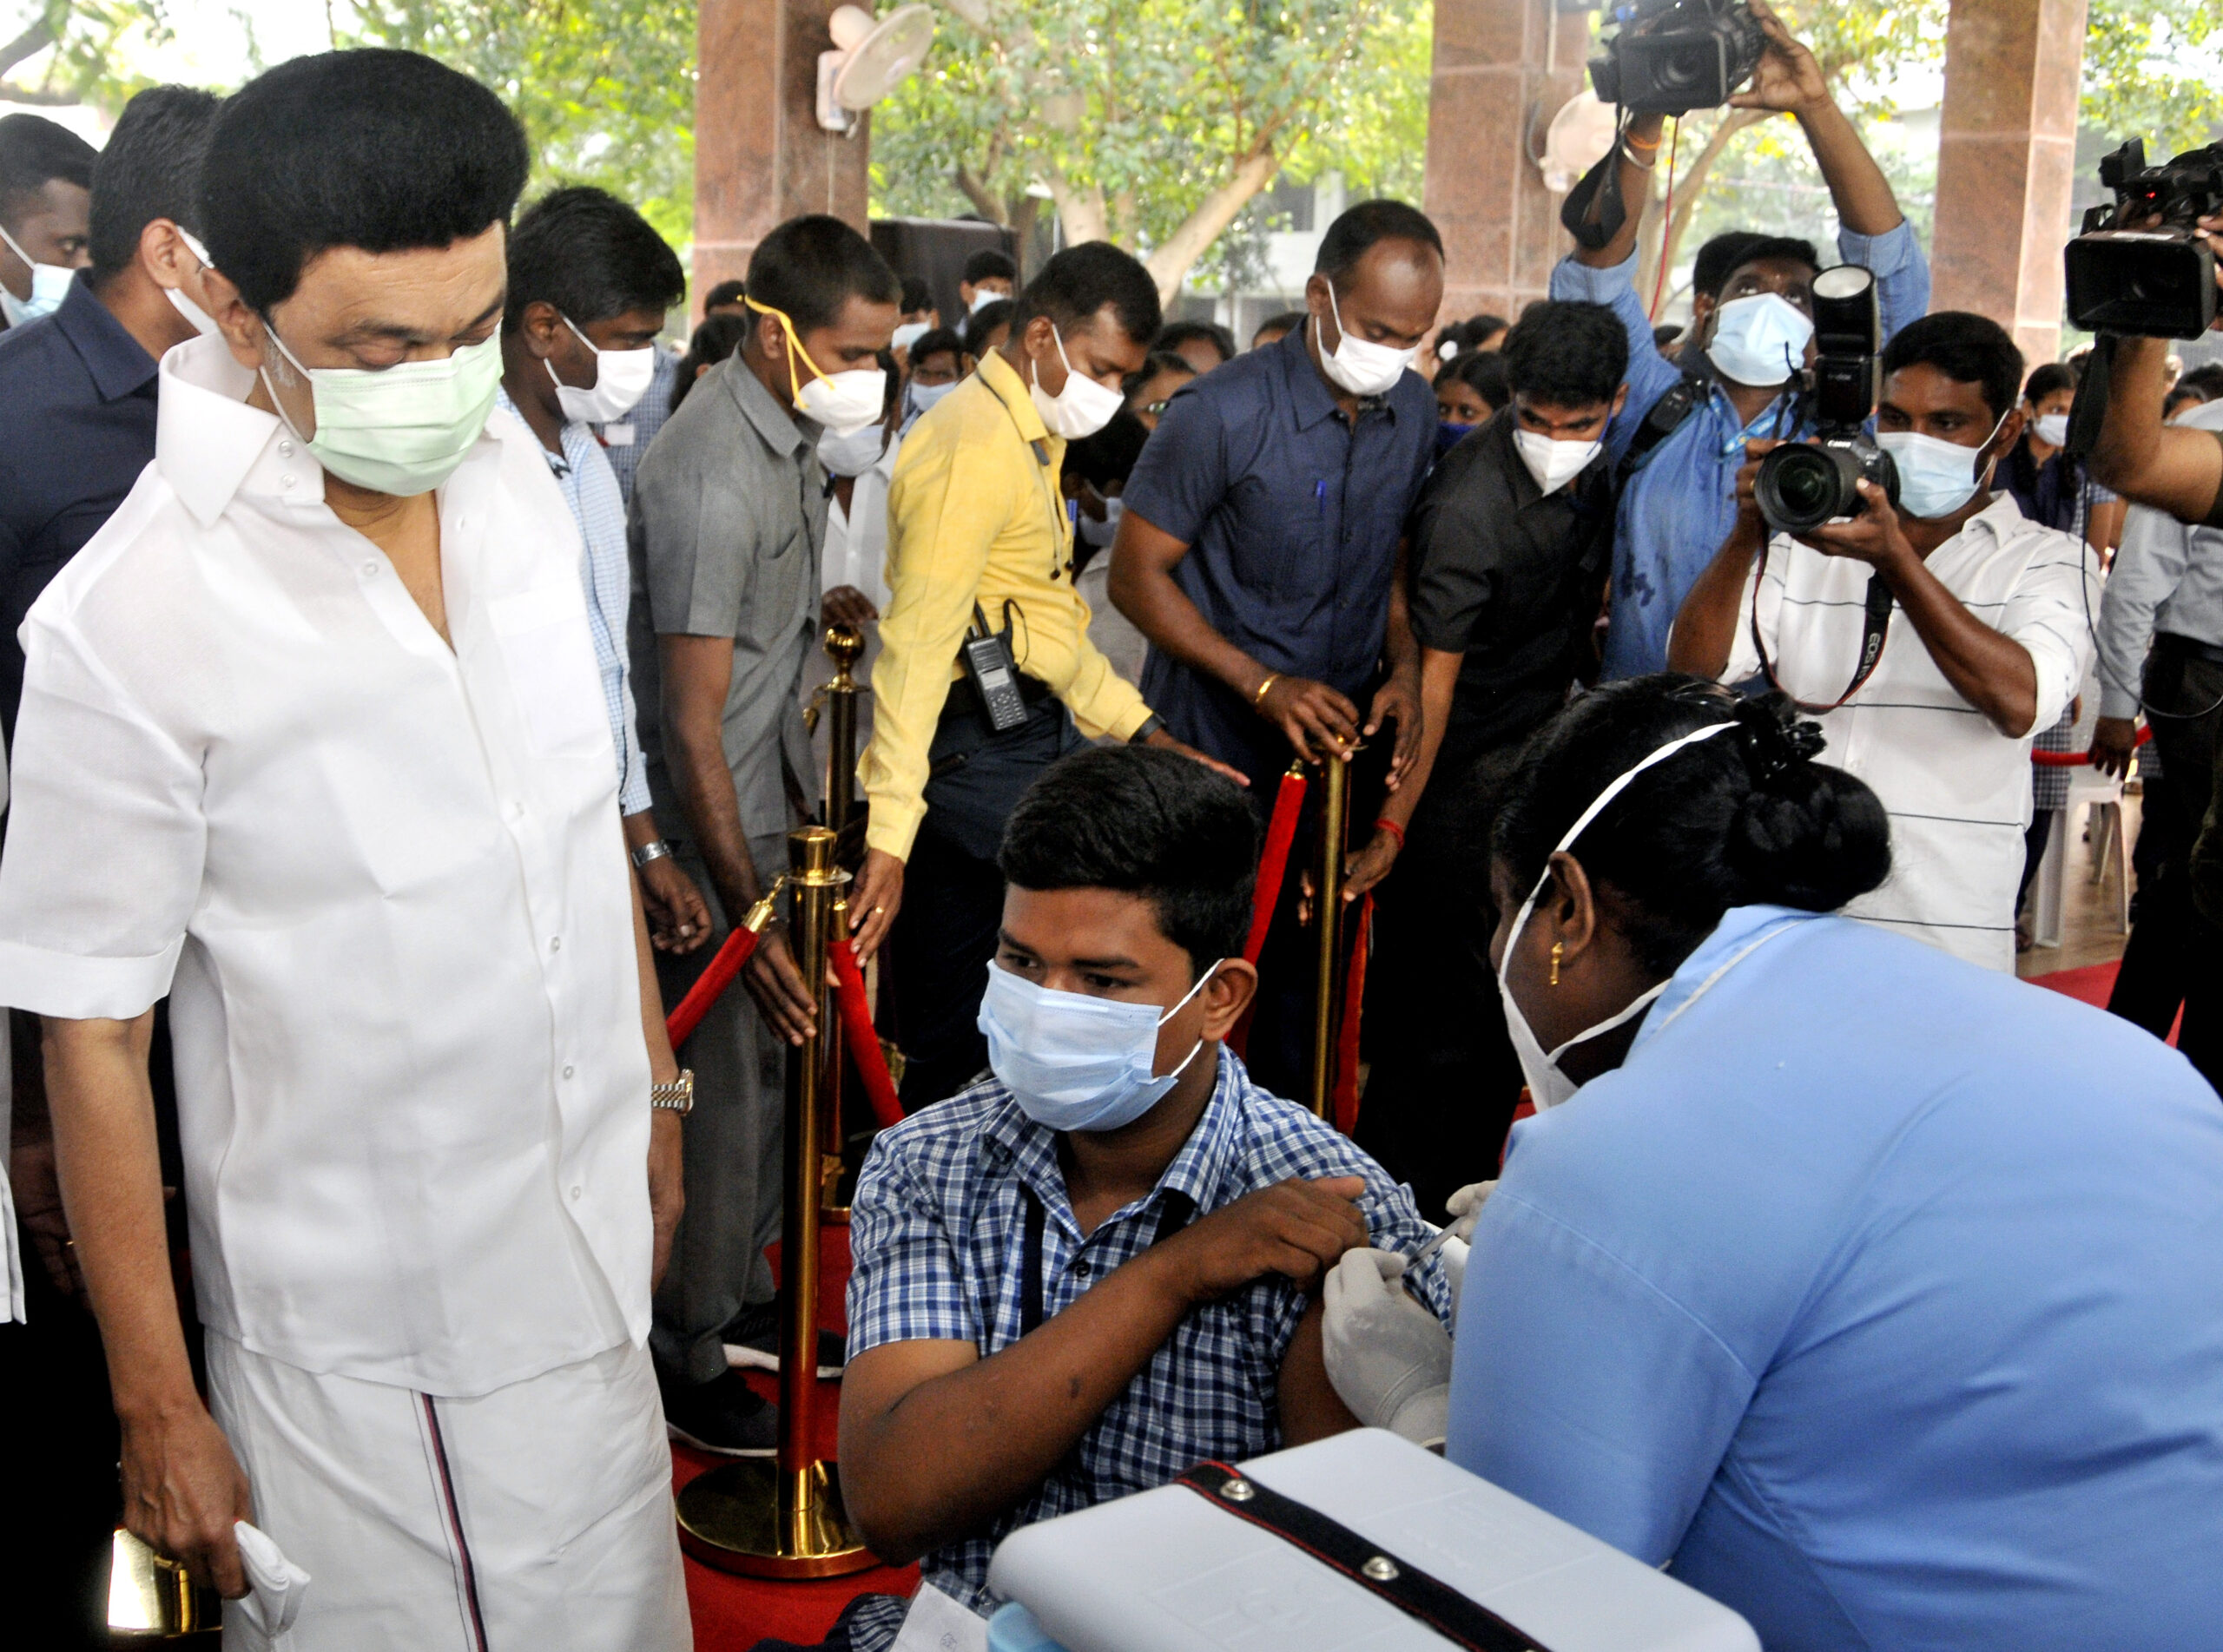 In 24 hours, India records 5,880 new Covid-19 cases